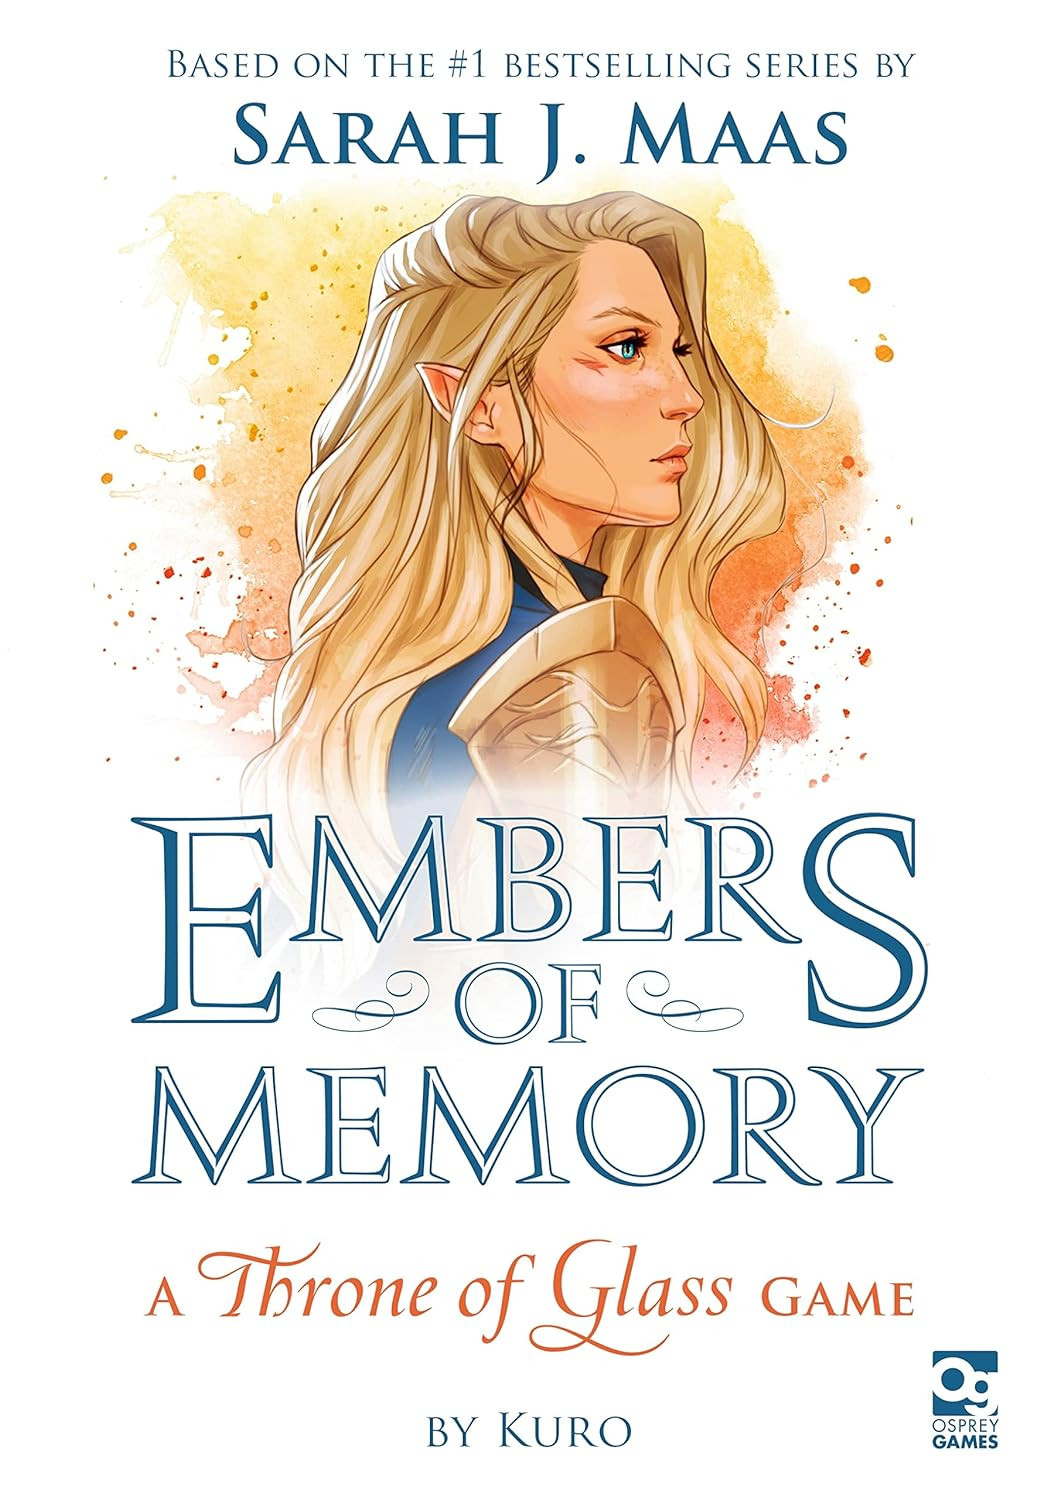 Publisher Bloomsbury - Embers of Memory: A Throne of Glass Game - Sarah J. Maas